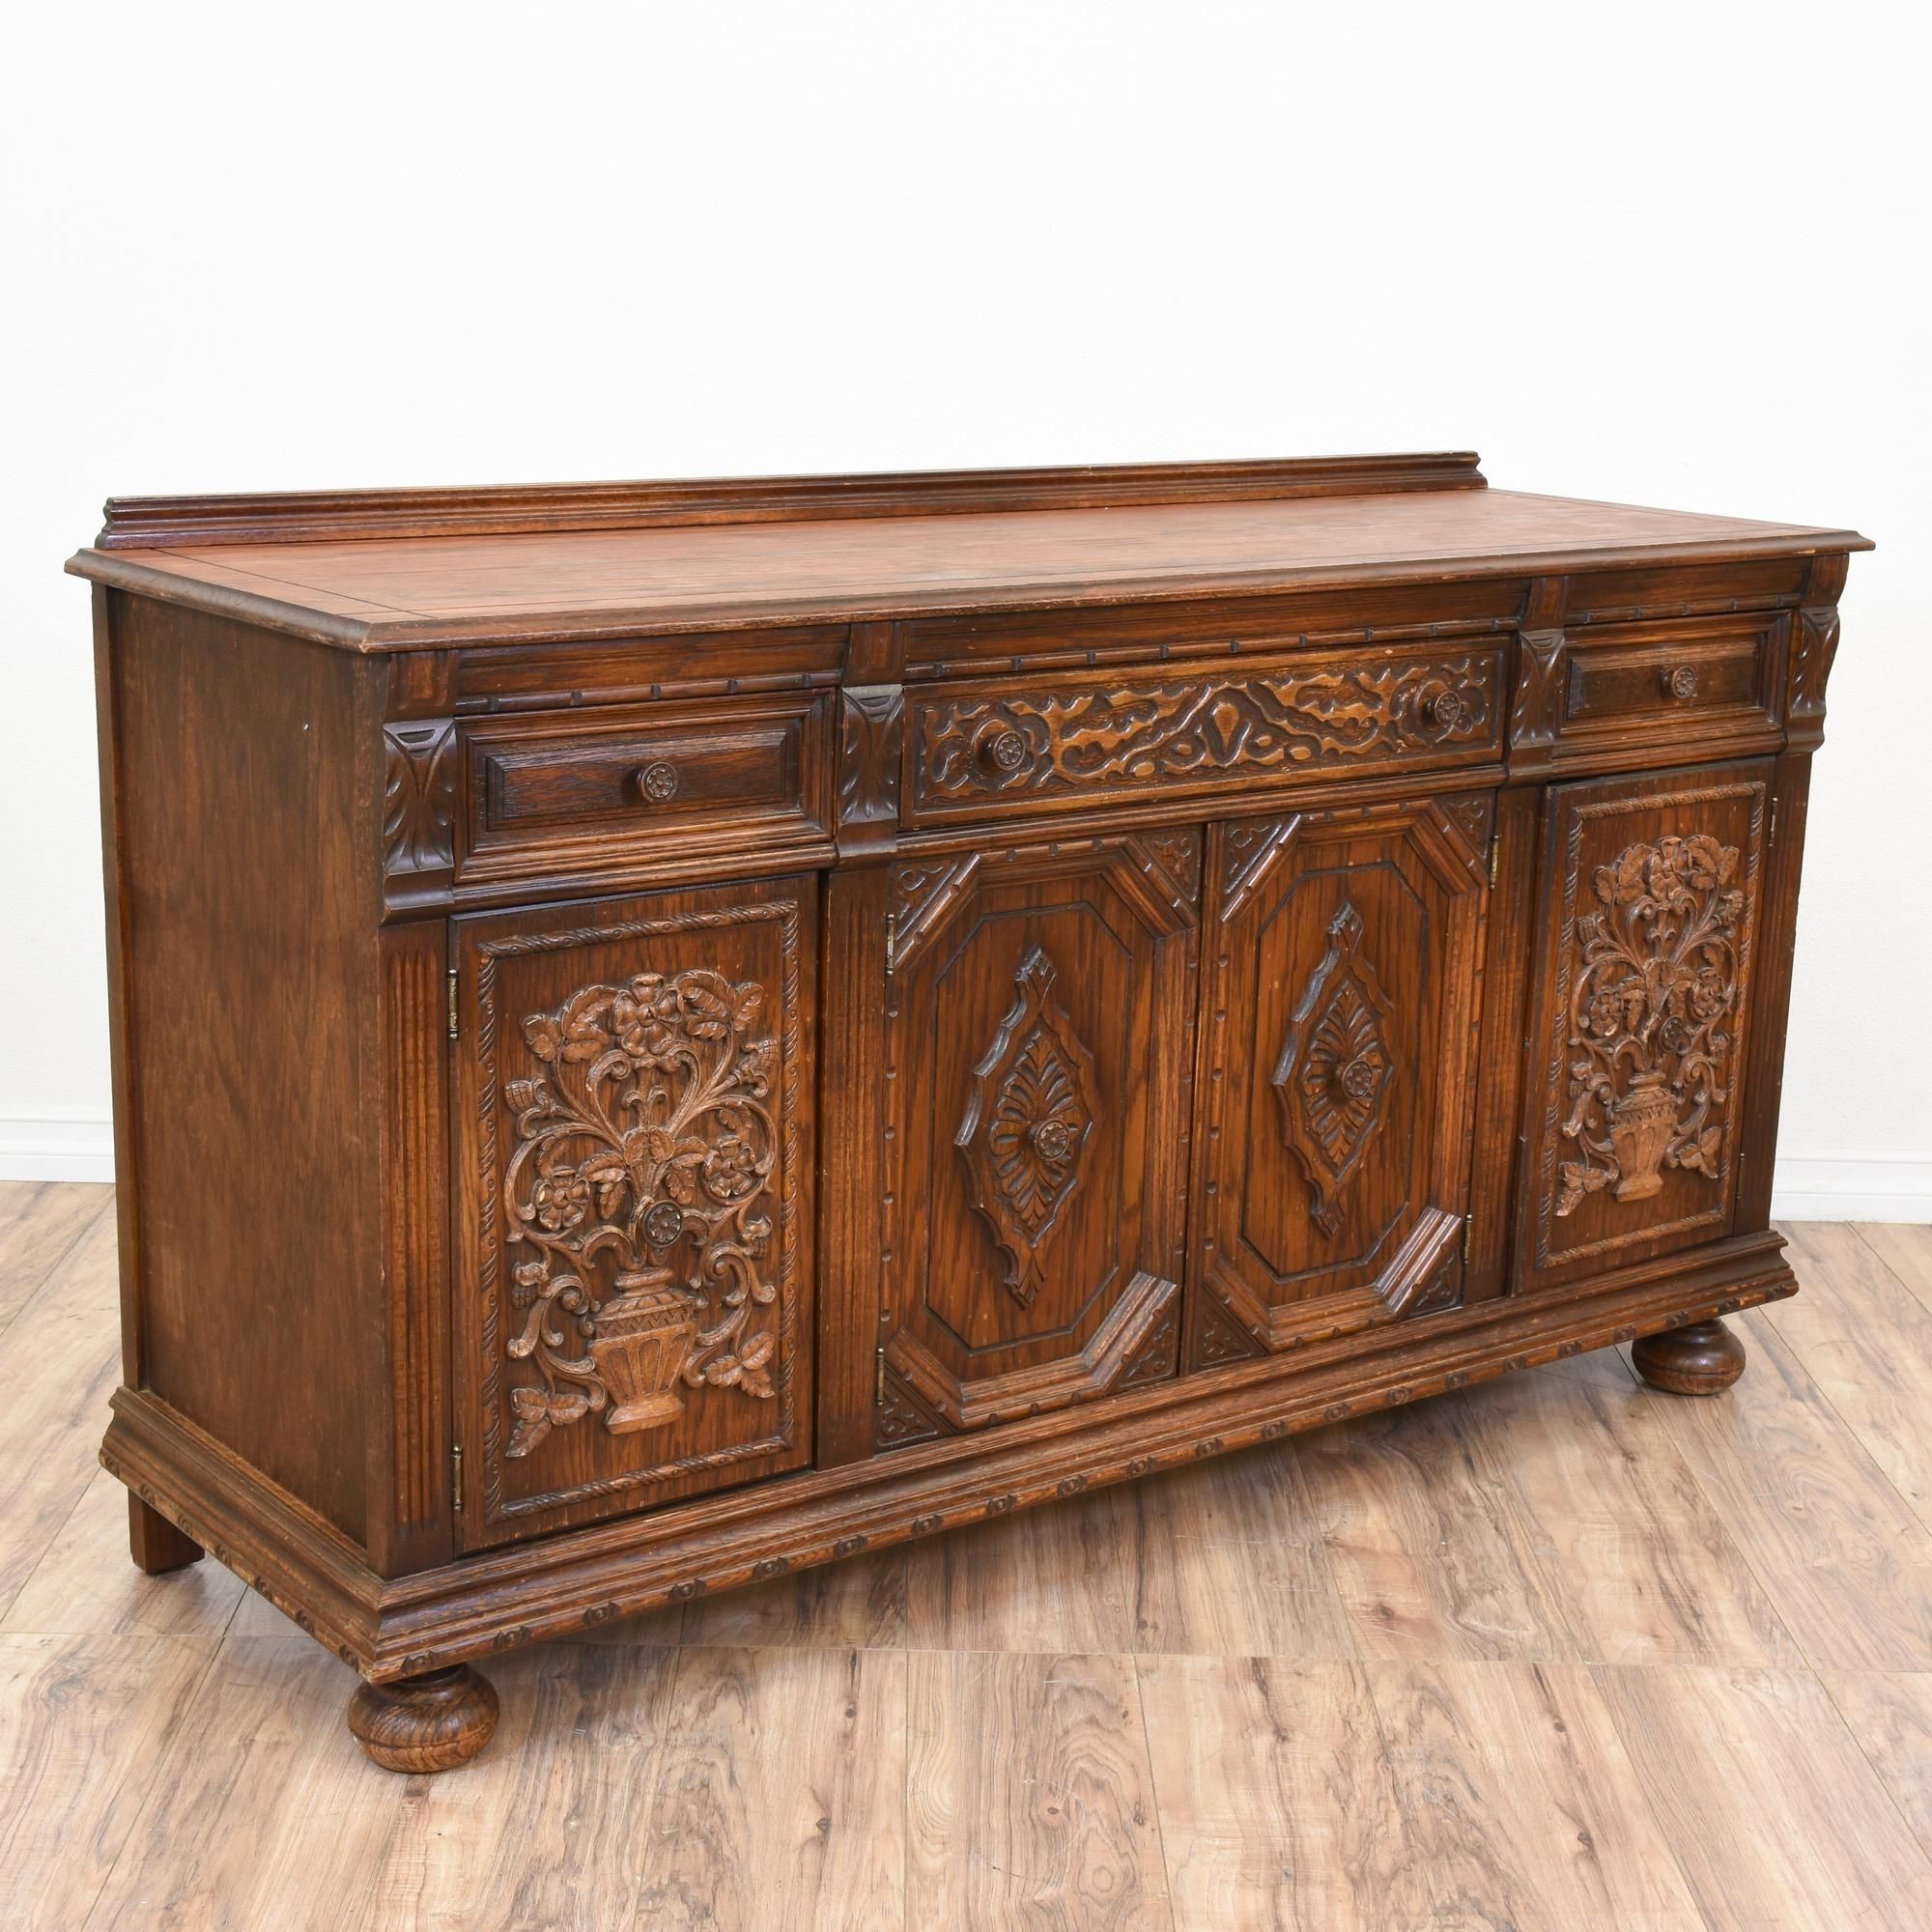 This Antique English Buffet Is Featured In A Solid Wood With A Regarding Best And Newest Vintage Finish 4 Door Sideboards (View 10 of 20)